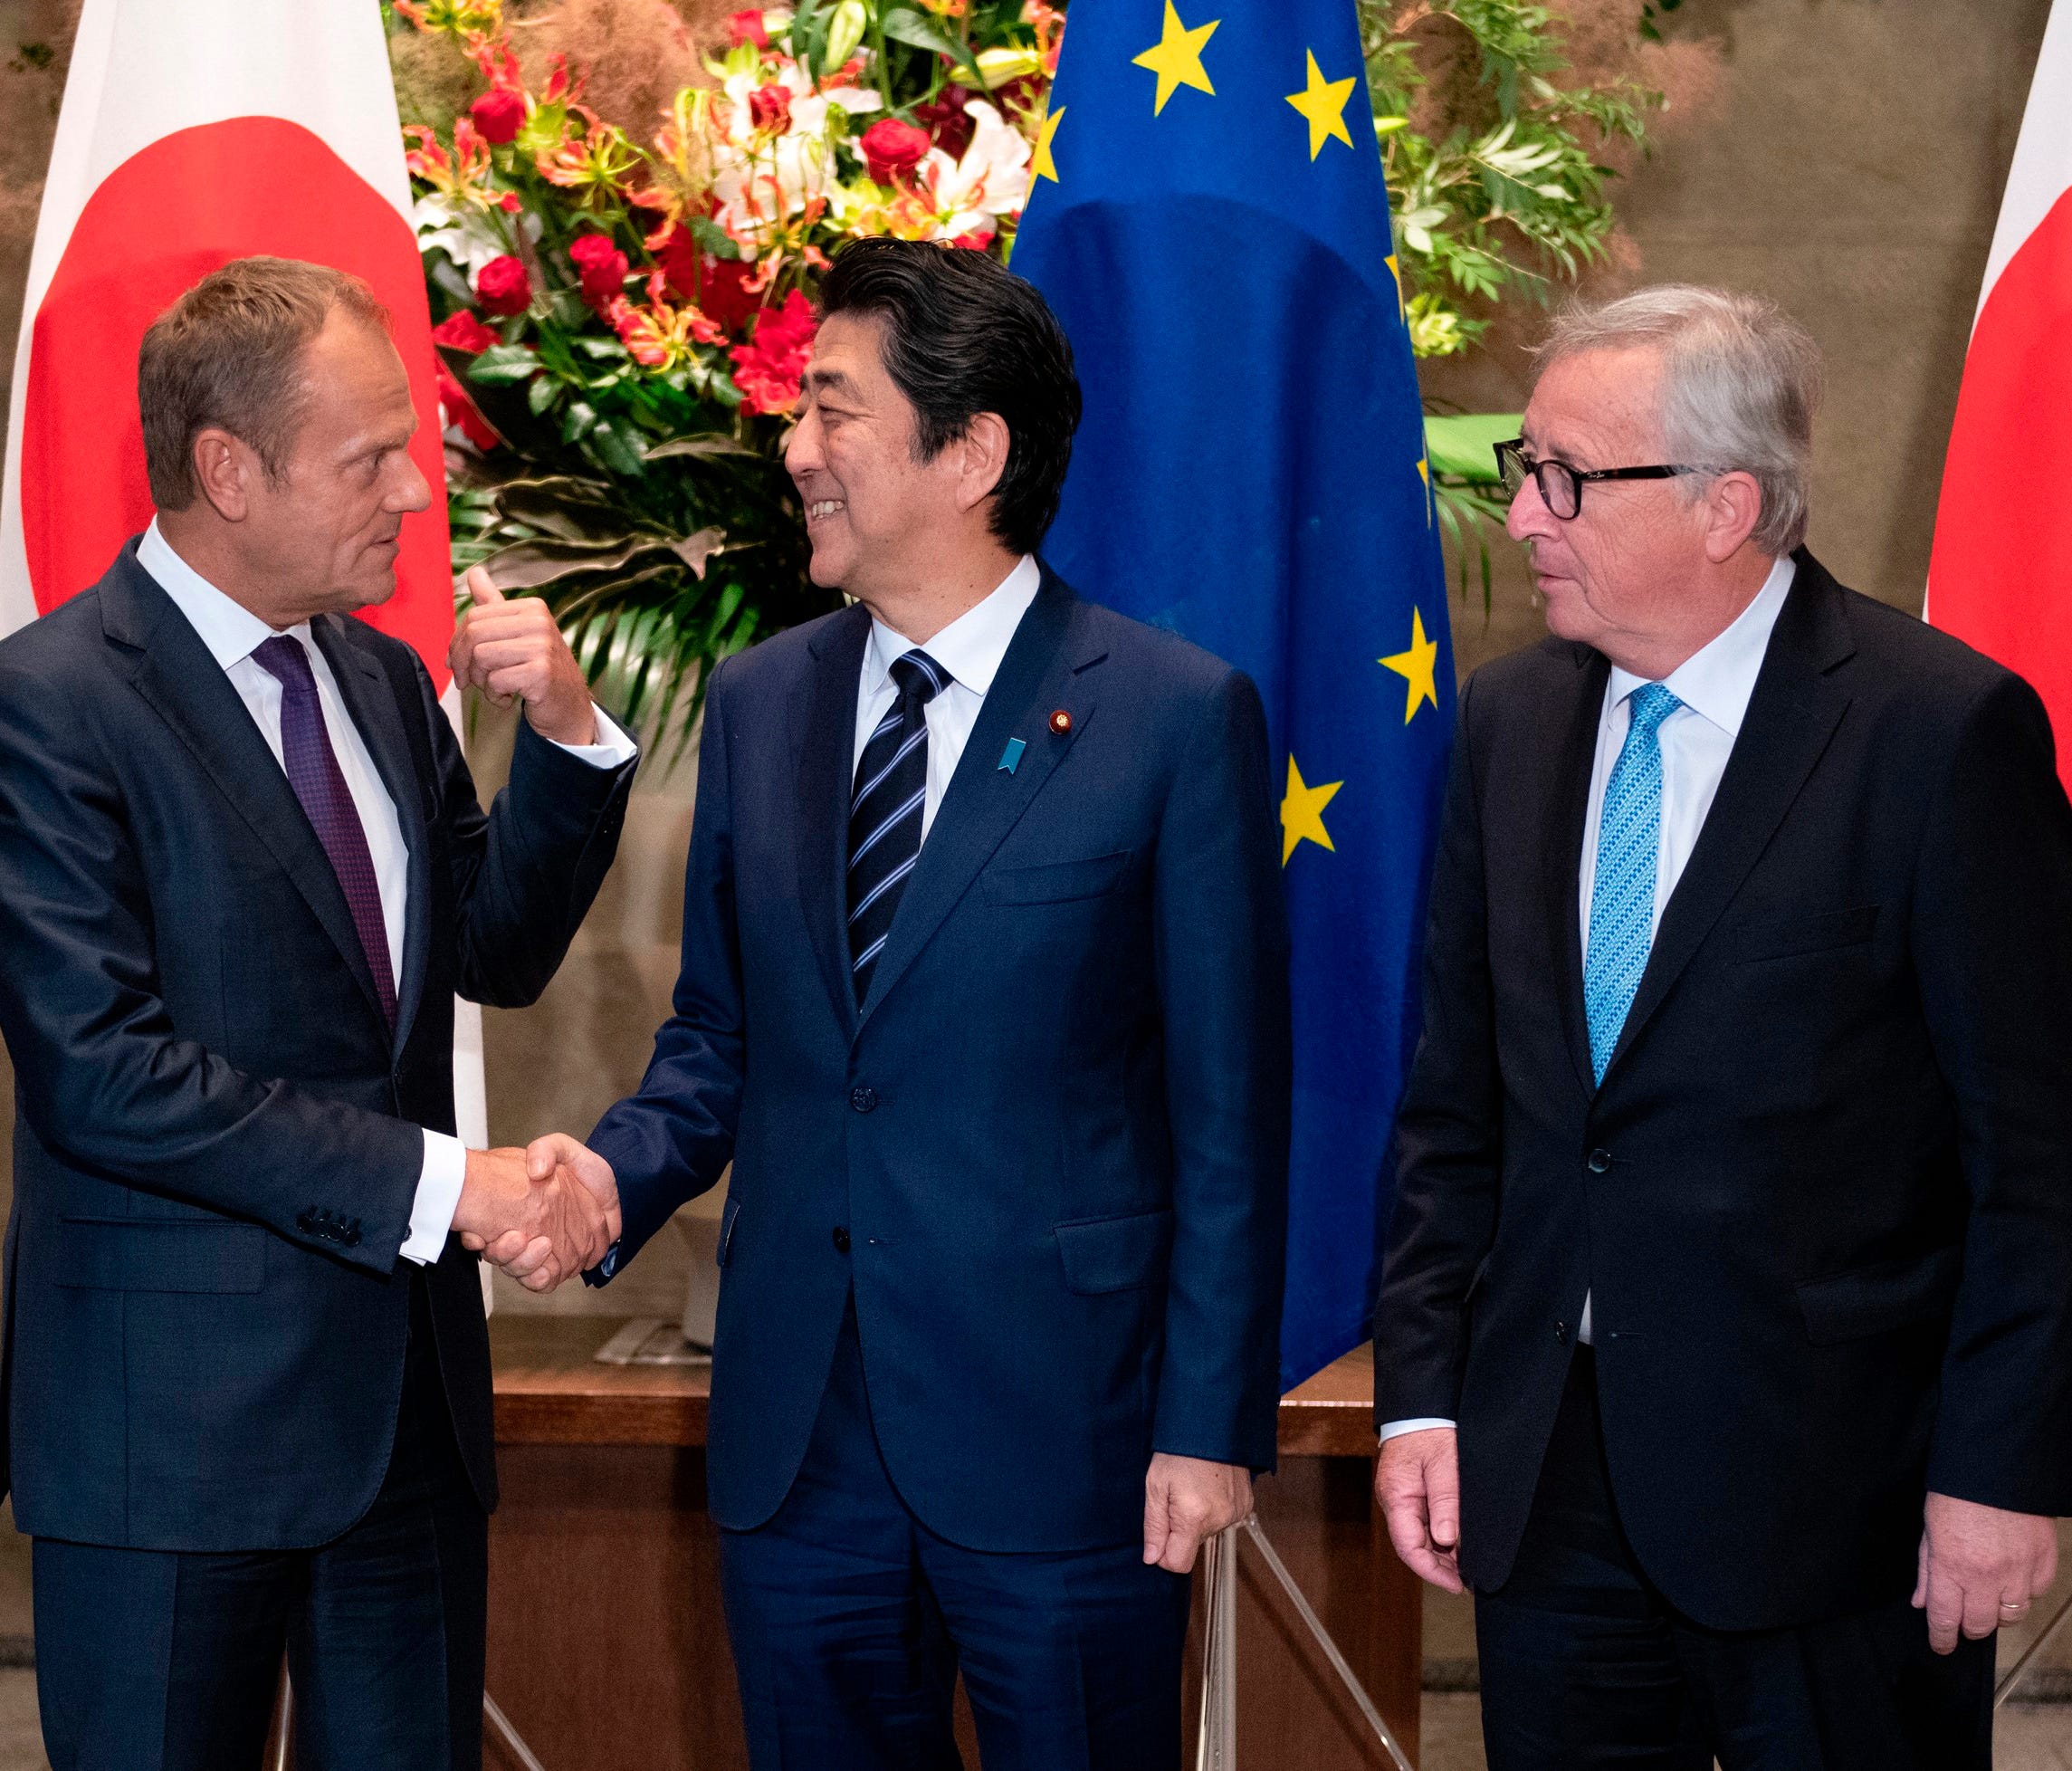 Japanese Prime Minister Shinzo Abe, center, shakes hands with European Council President Donald Tusk next to European Commission President Jean-Claude Juncker, right, before a meeting at Abe's official residence in Tokyo Tuesday, July 17, 2018.